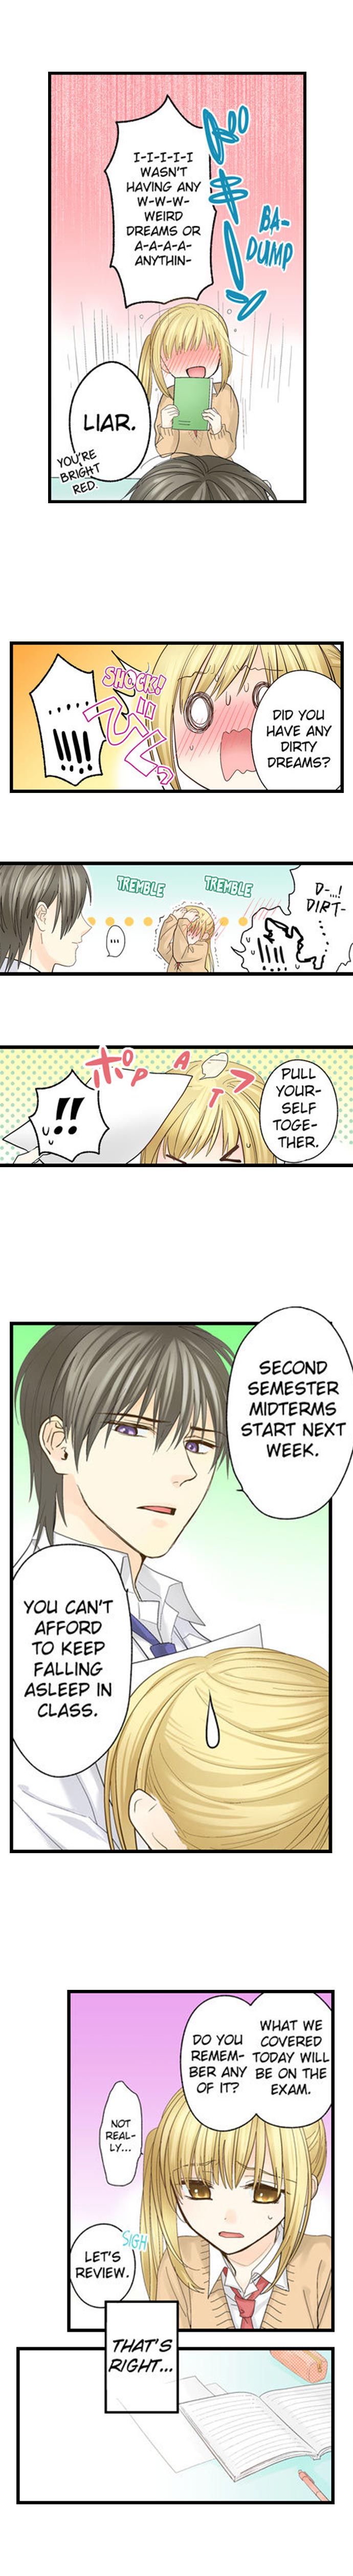 Running a Love Hotel with My Math Teacher - Chapter 5 Page 8